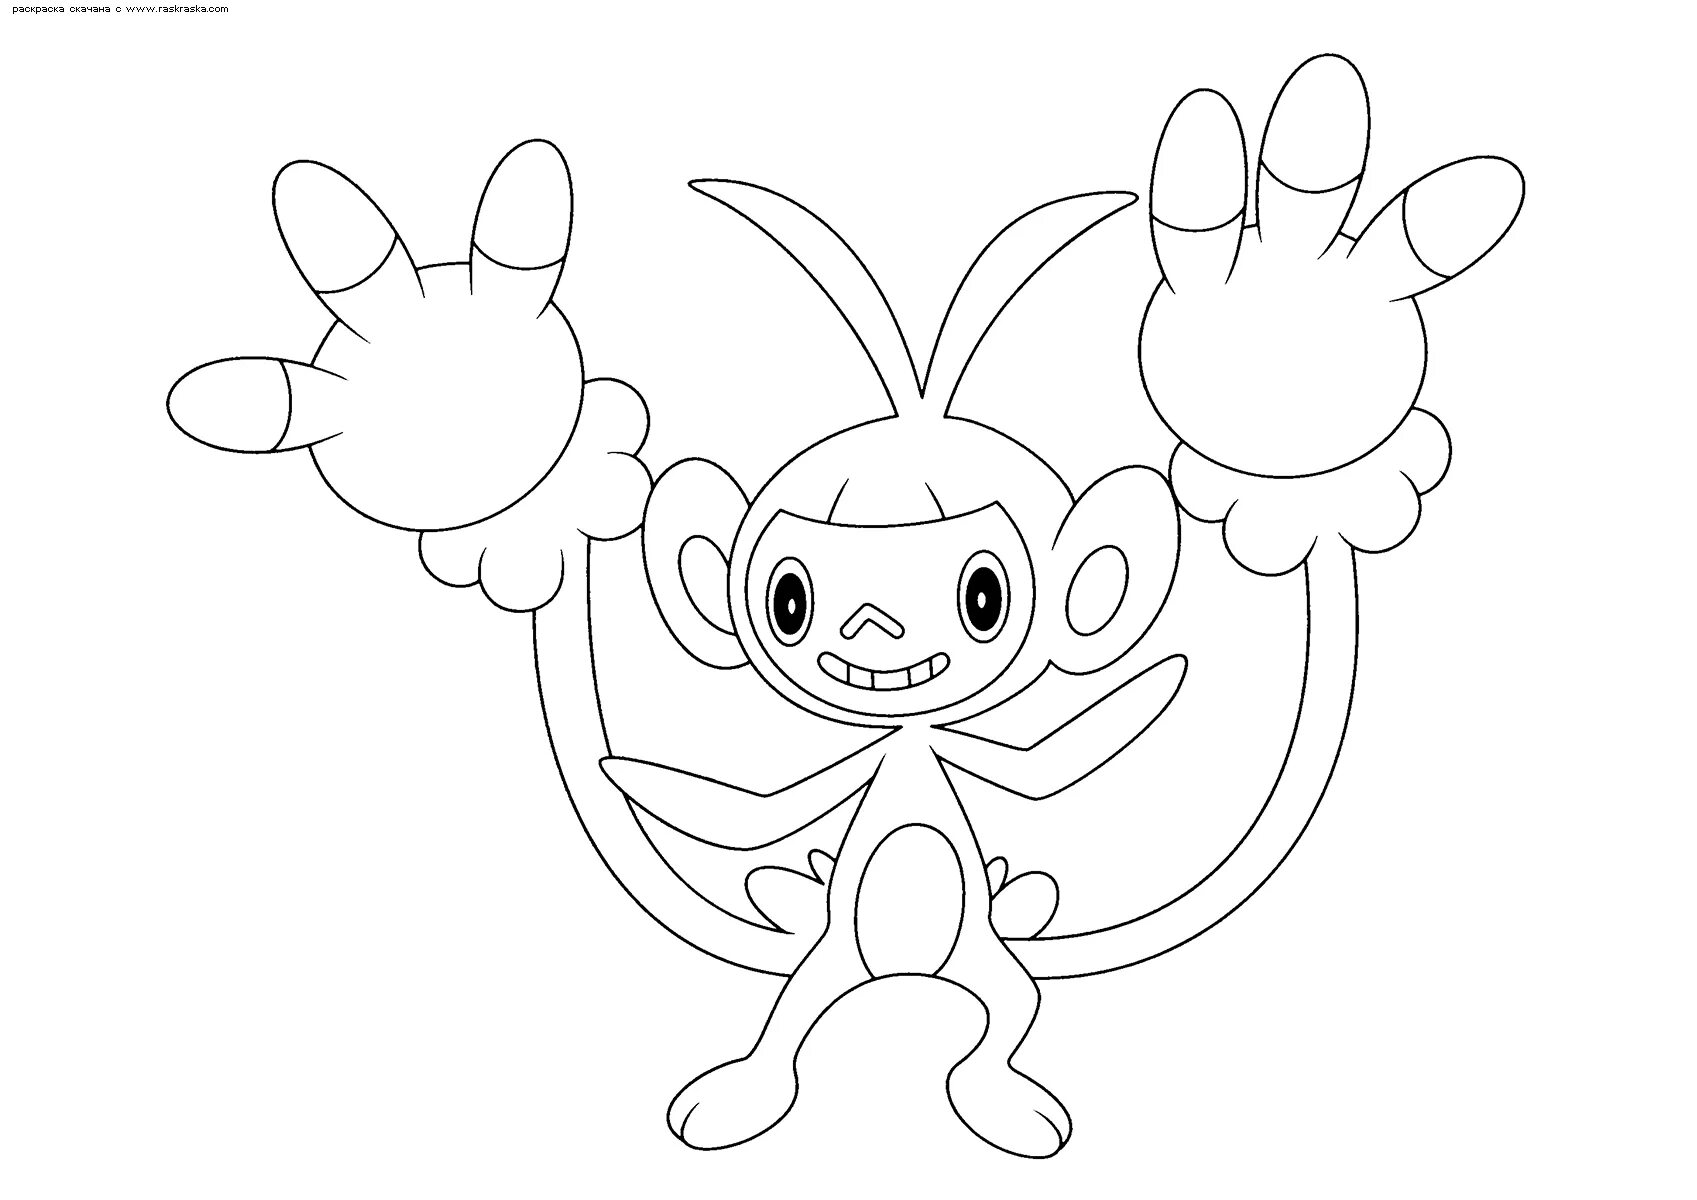 Wonderful chimchar coloring book